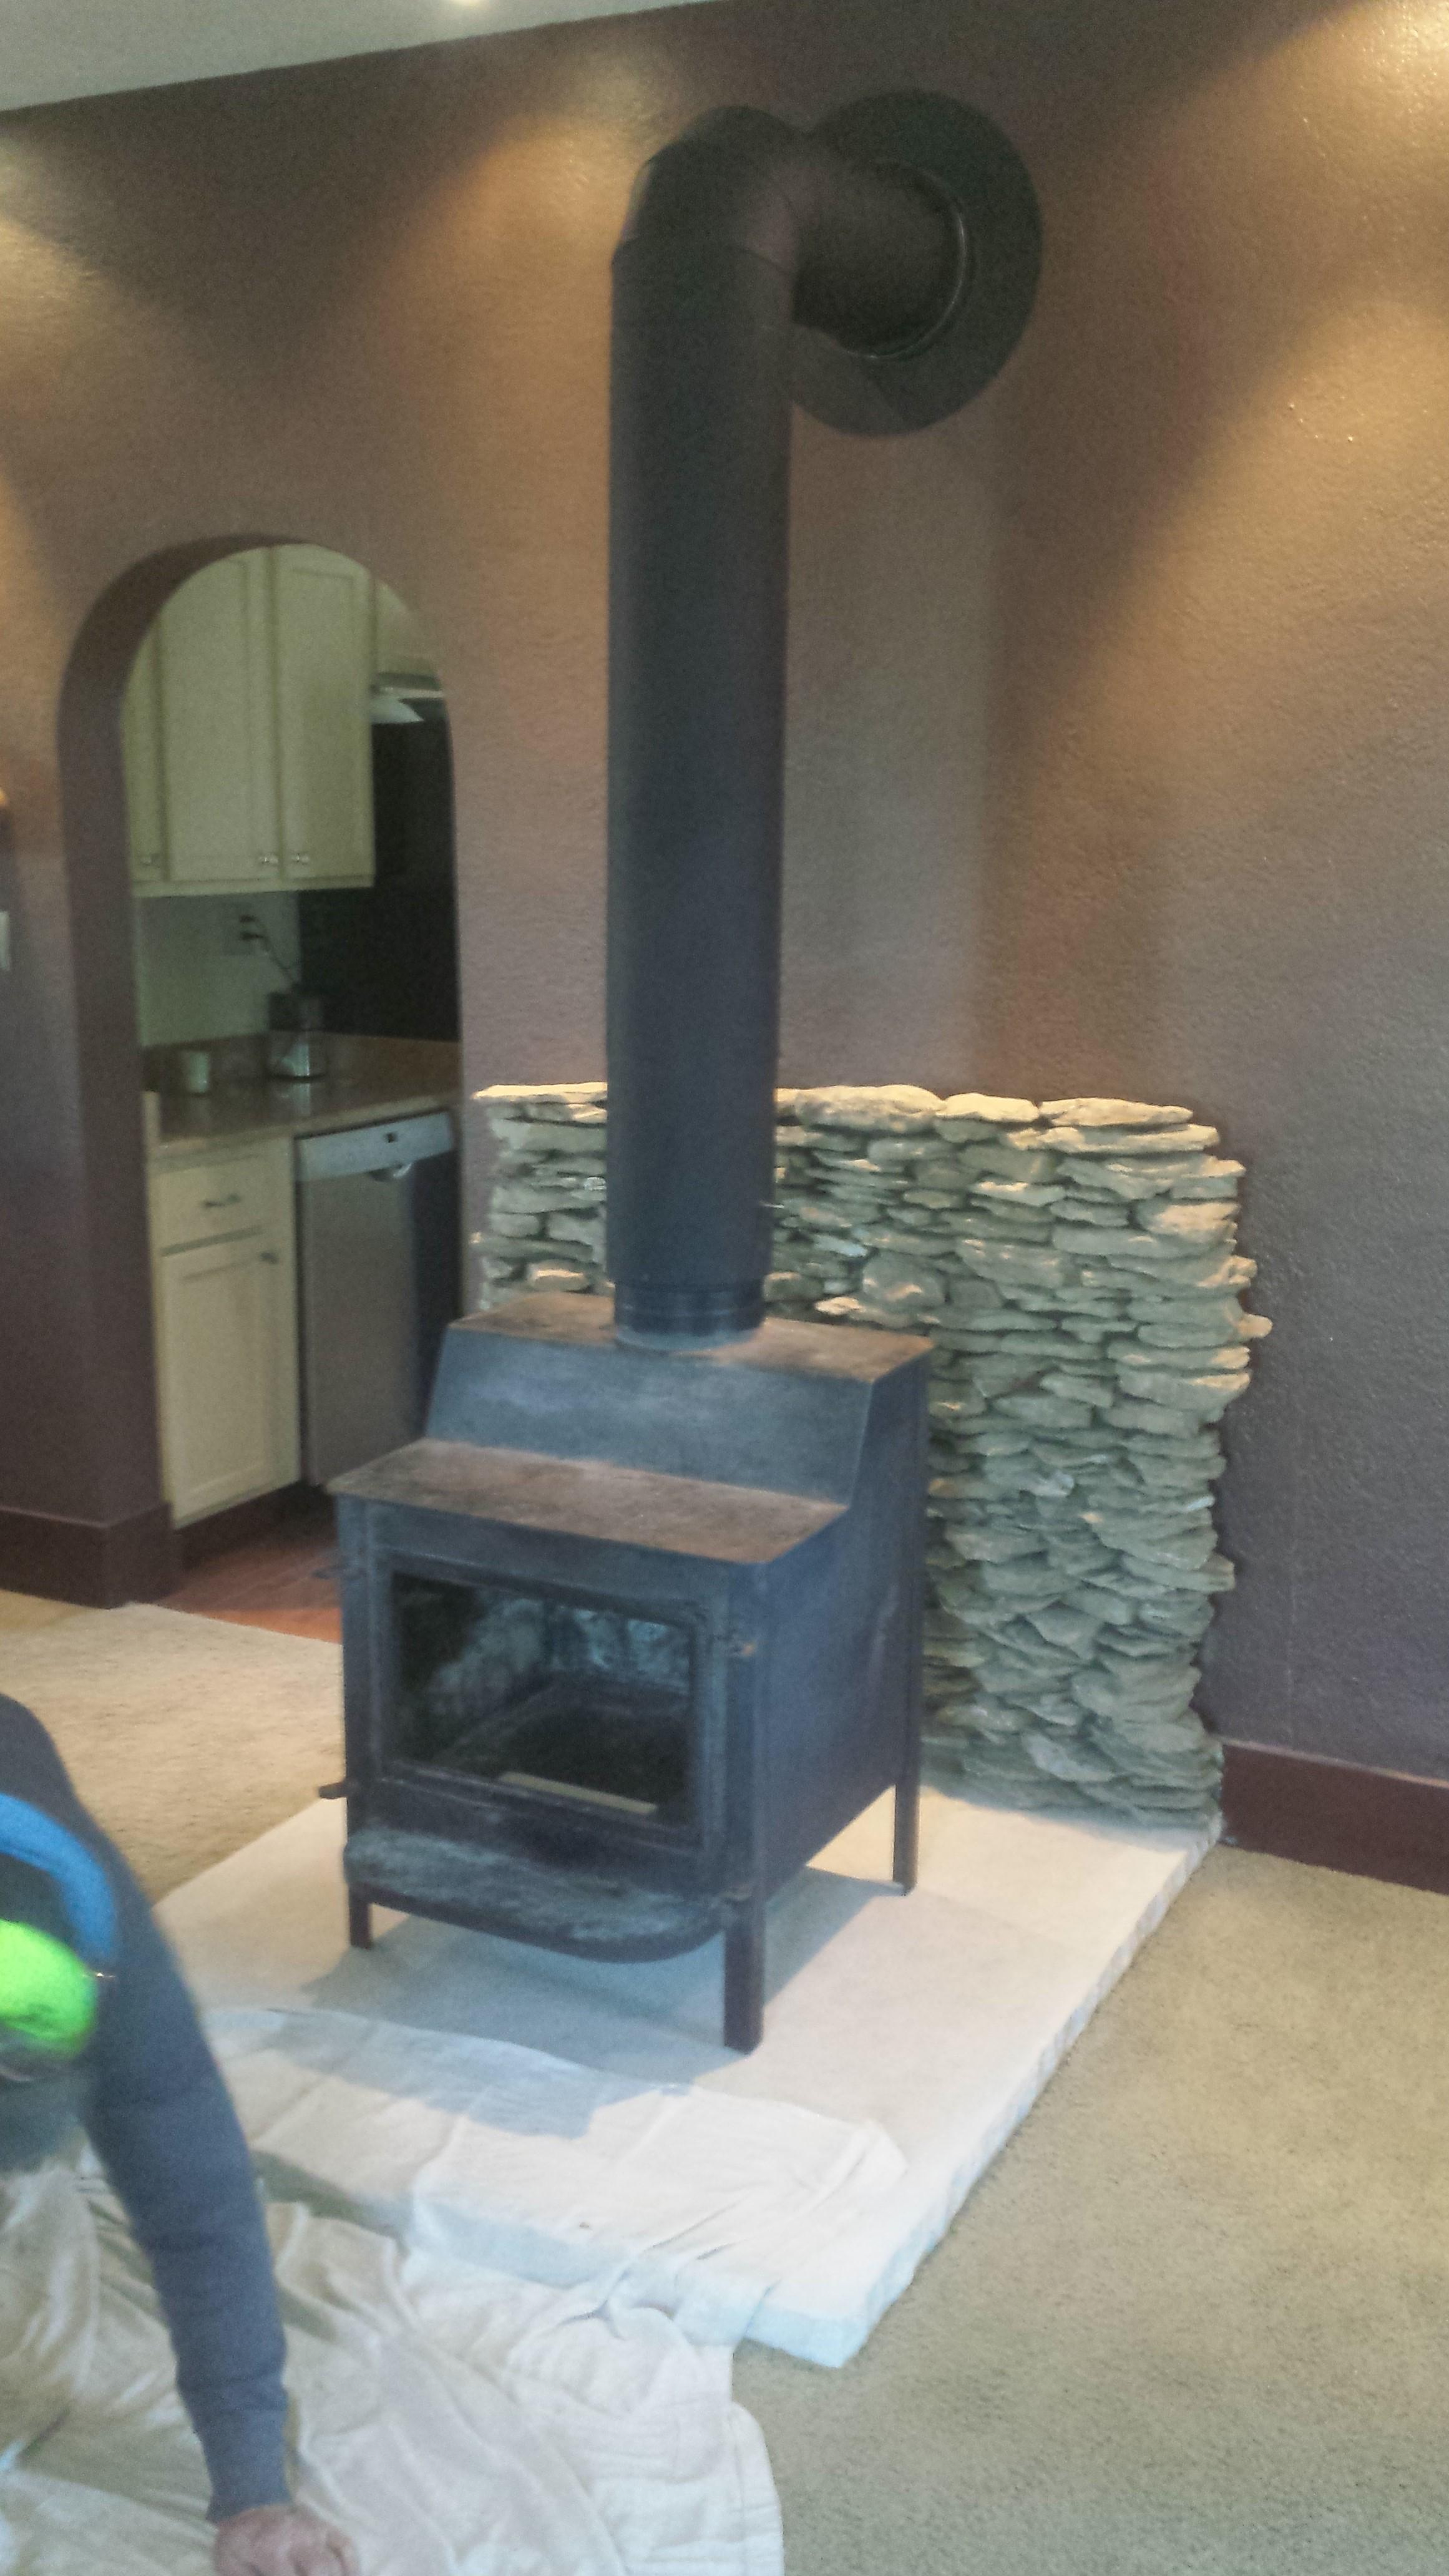 We cut out the carpet, installed a 600 pound piece of limestone as a hearth, full bed Missouri ledge stone wall protection, and wood burning stove with chimney.